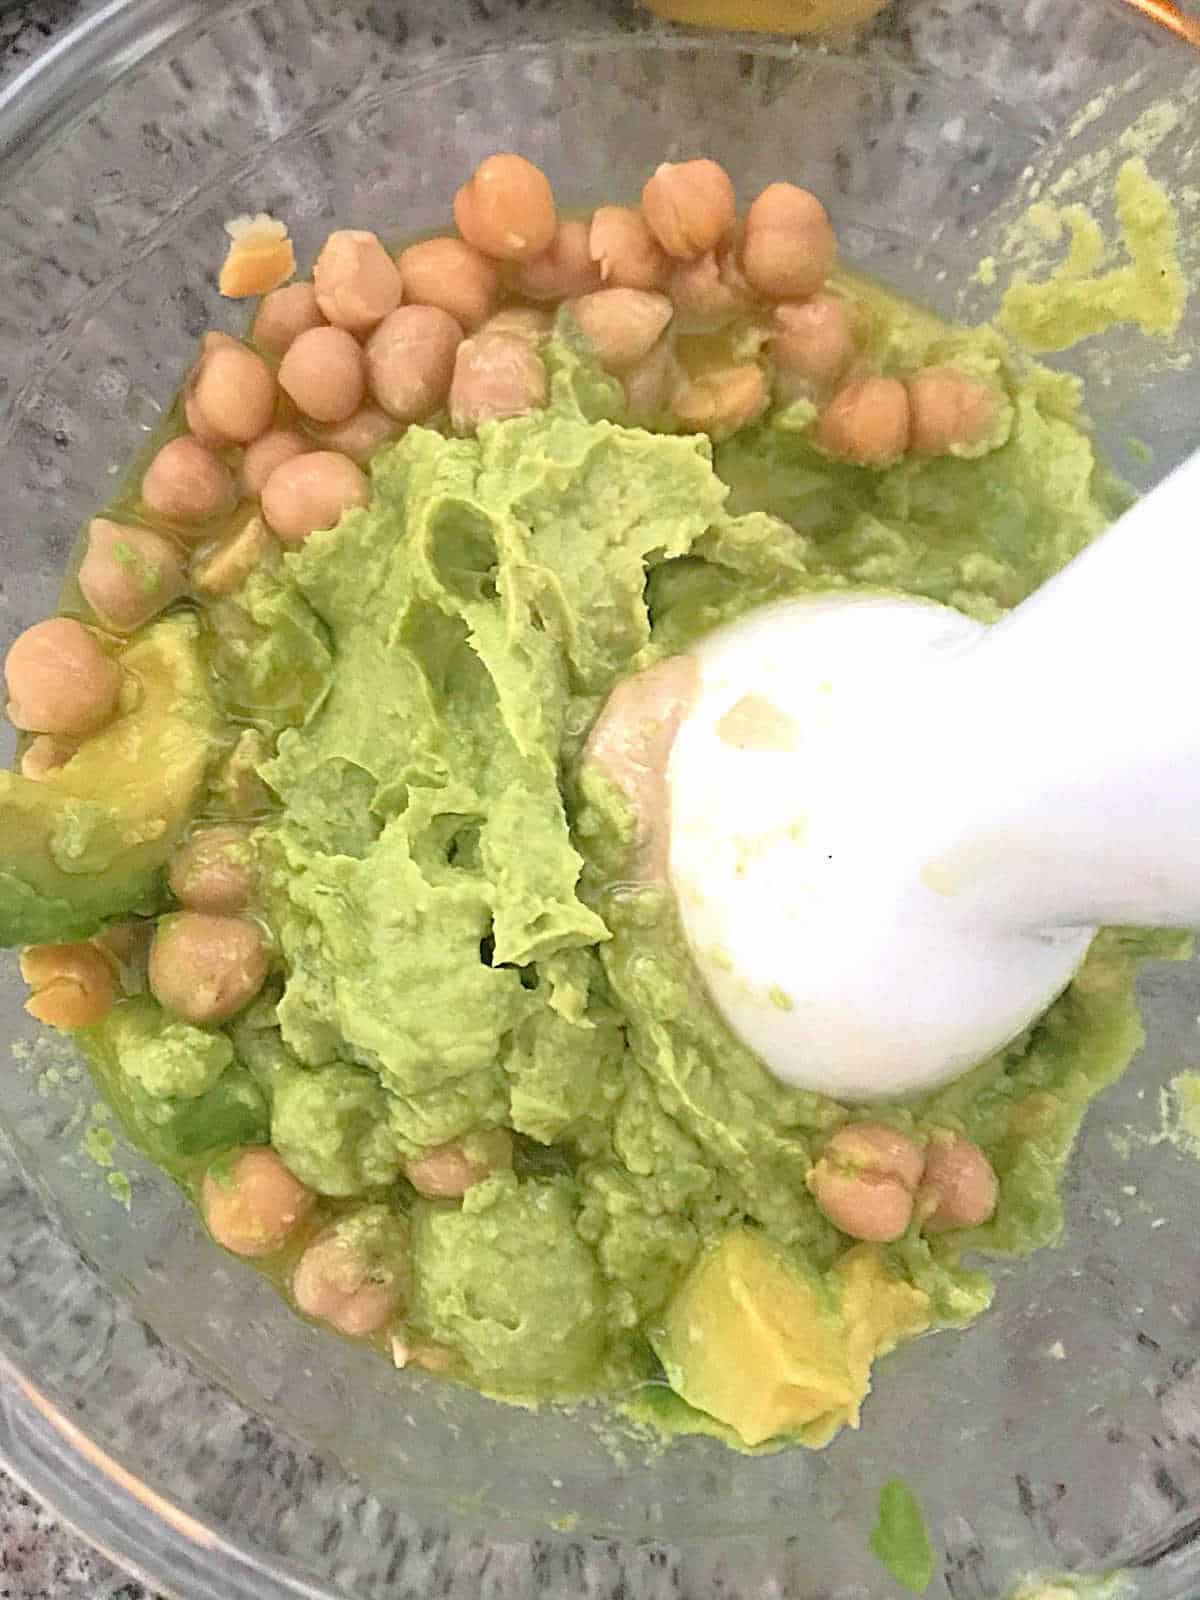 Mixing avocado with chickpeas in a glass bowl.